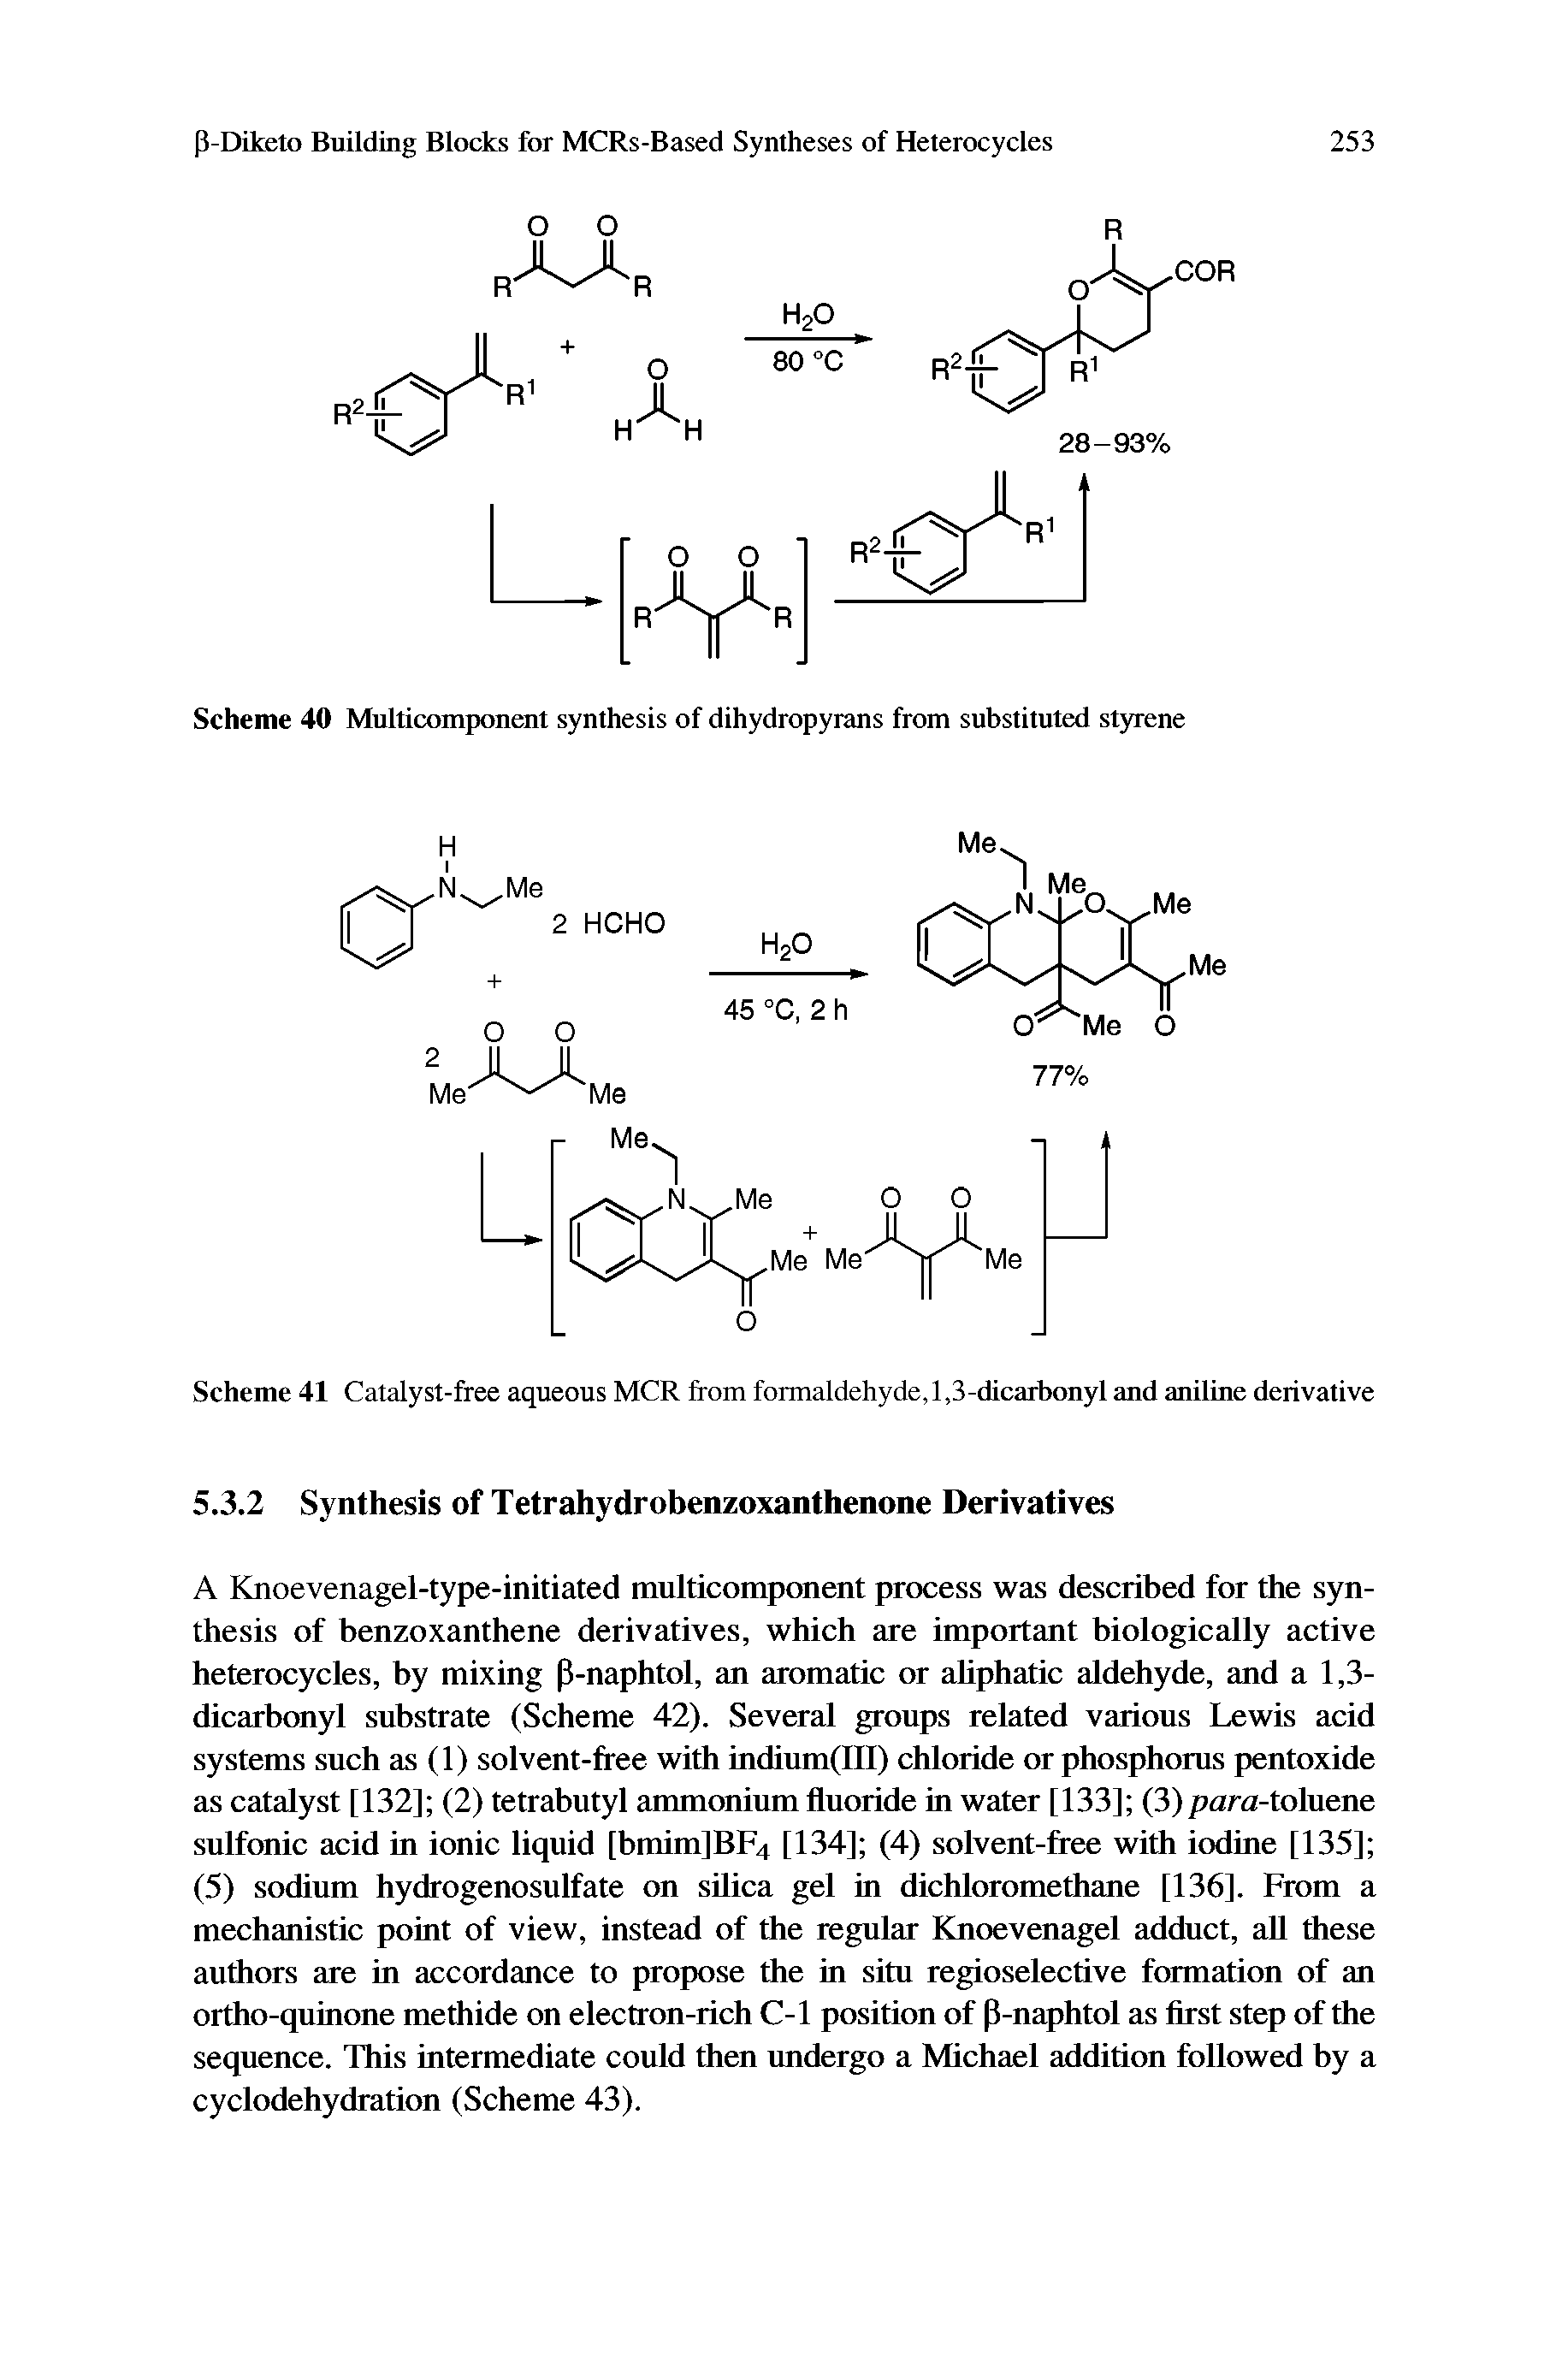 Scheme 40 Multicomponent synthesis of dihydropyrans from substituted styrene...